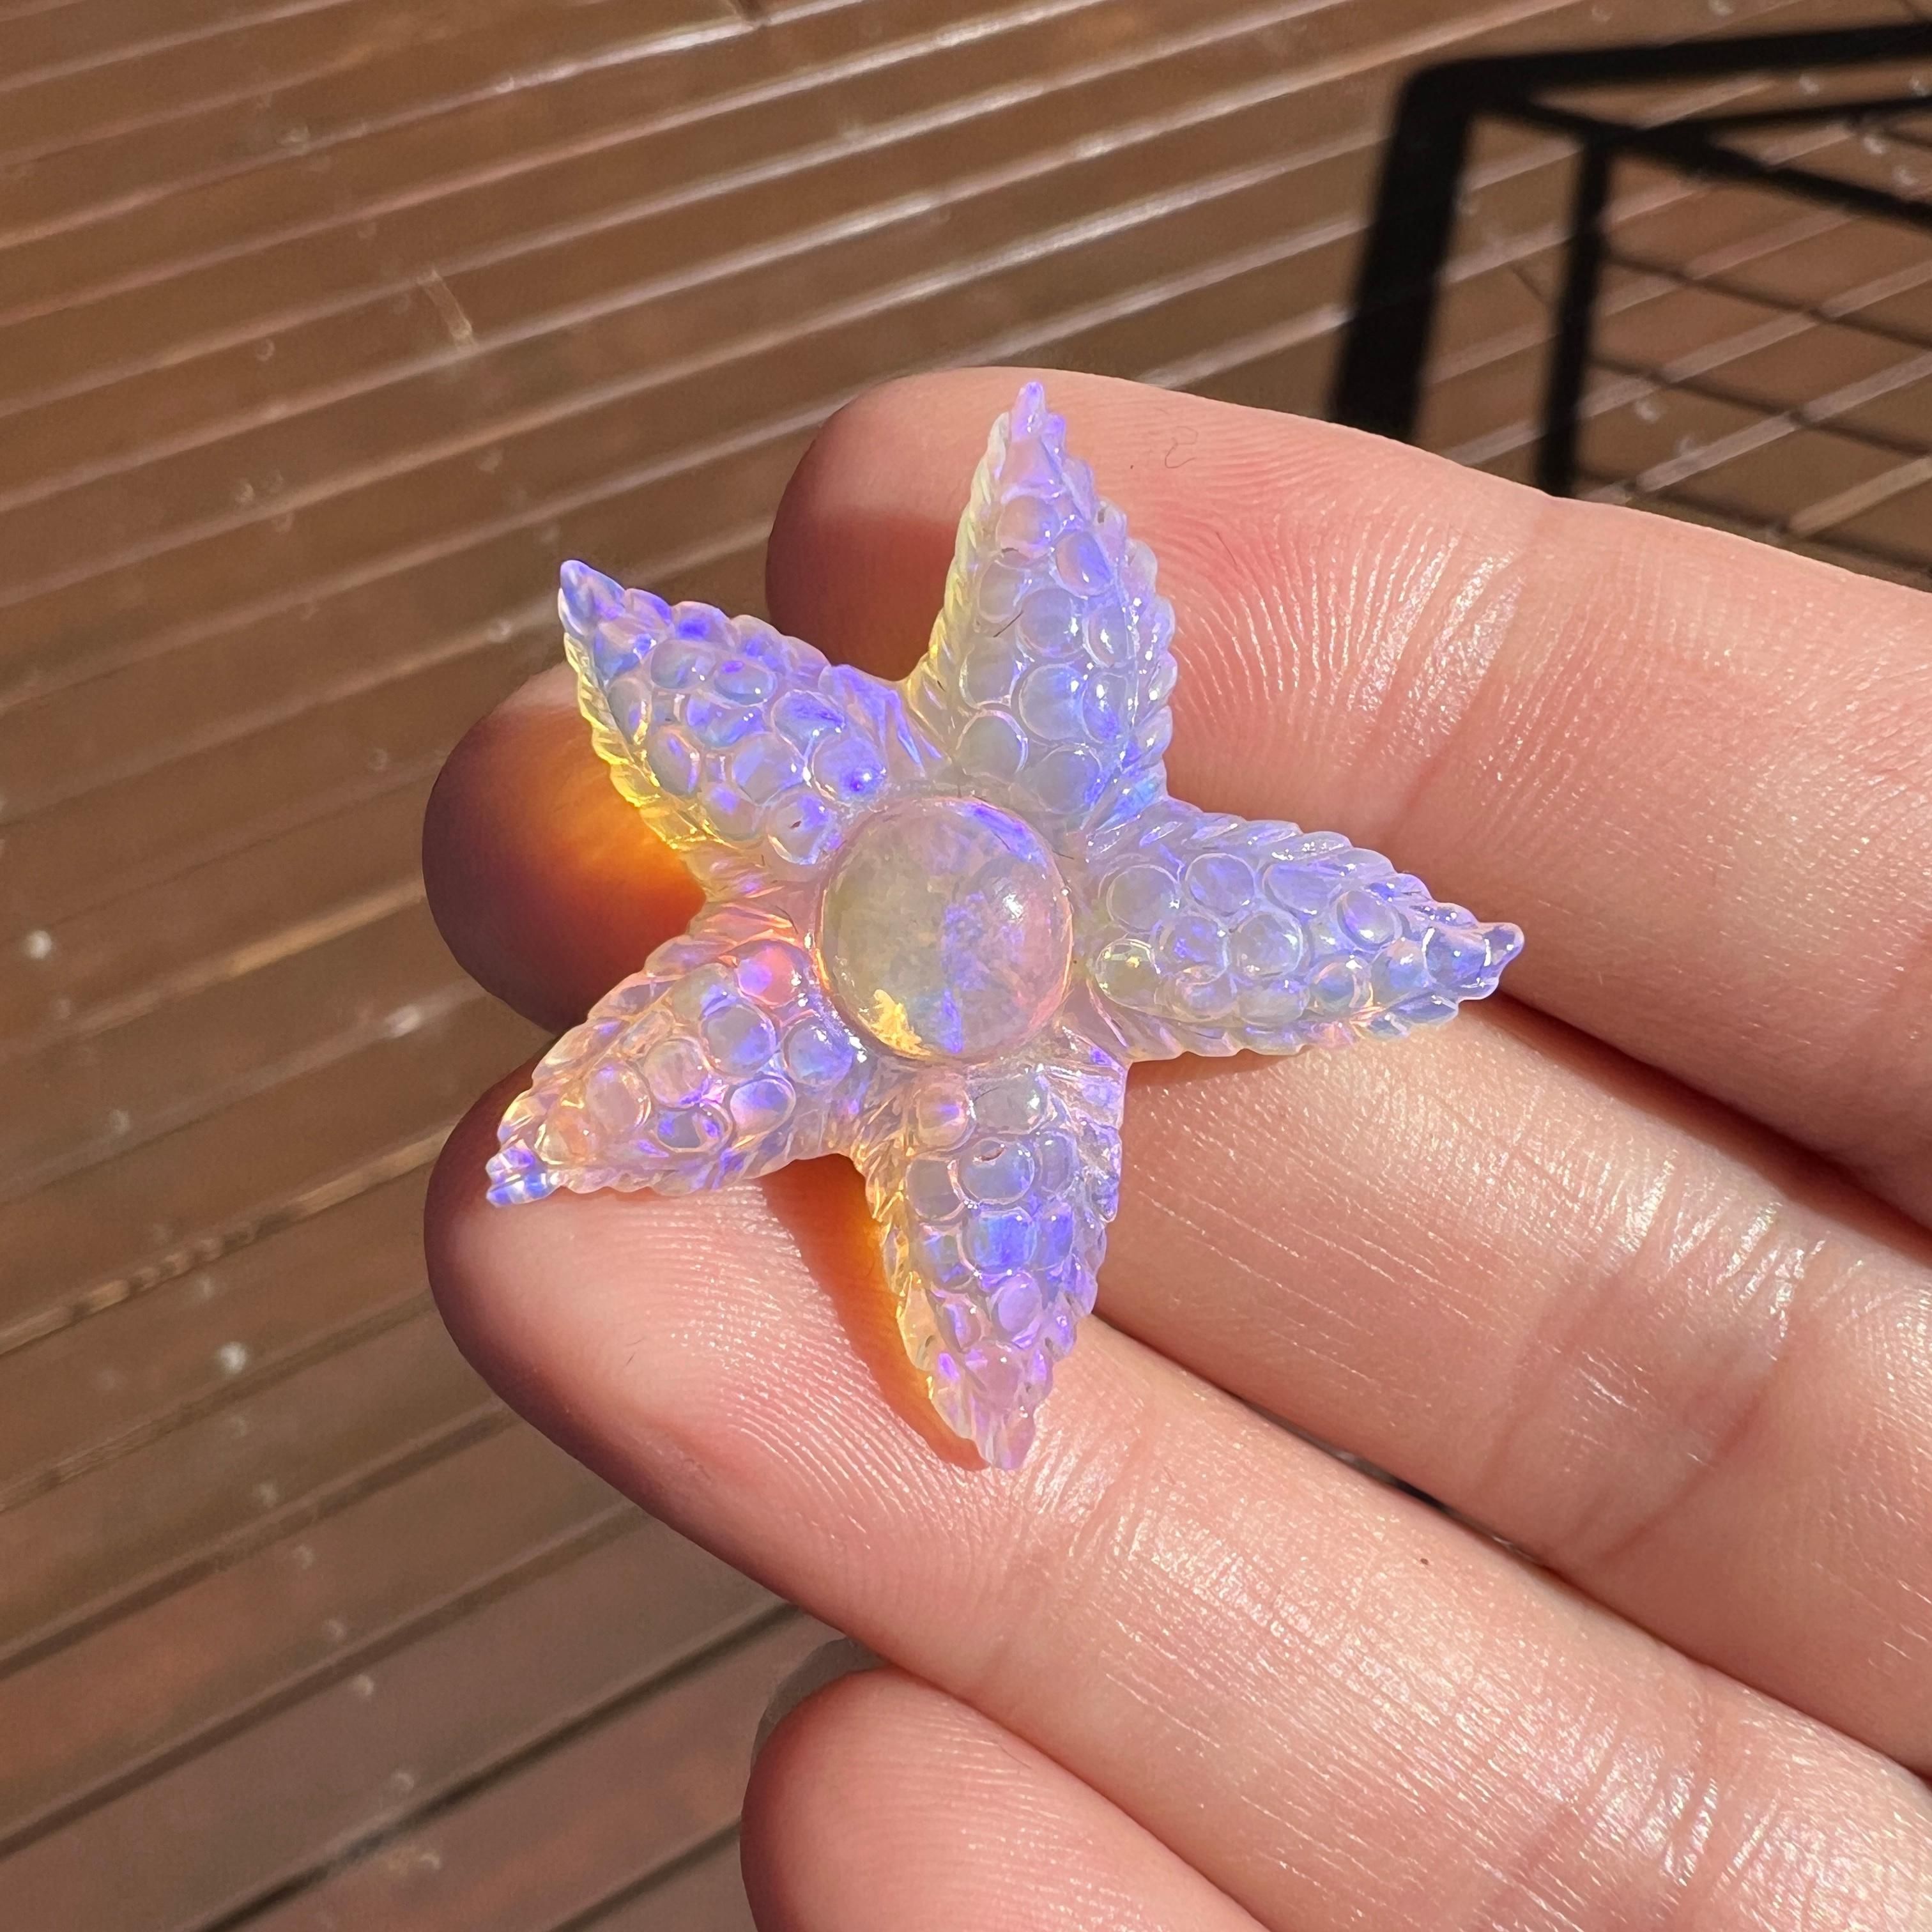 This beautiful 21.67 Ct Australian gem crystal opal, carved into a large starfish, is a truly exceptional addition to any collection, mined by Sue Cooper herself. Its rarity, coupled with the amazing starfish carving, captivates connoisseurs with